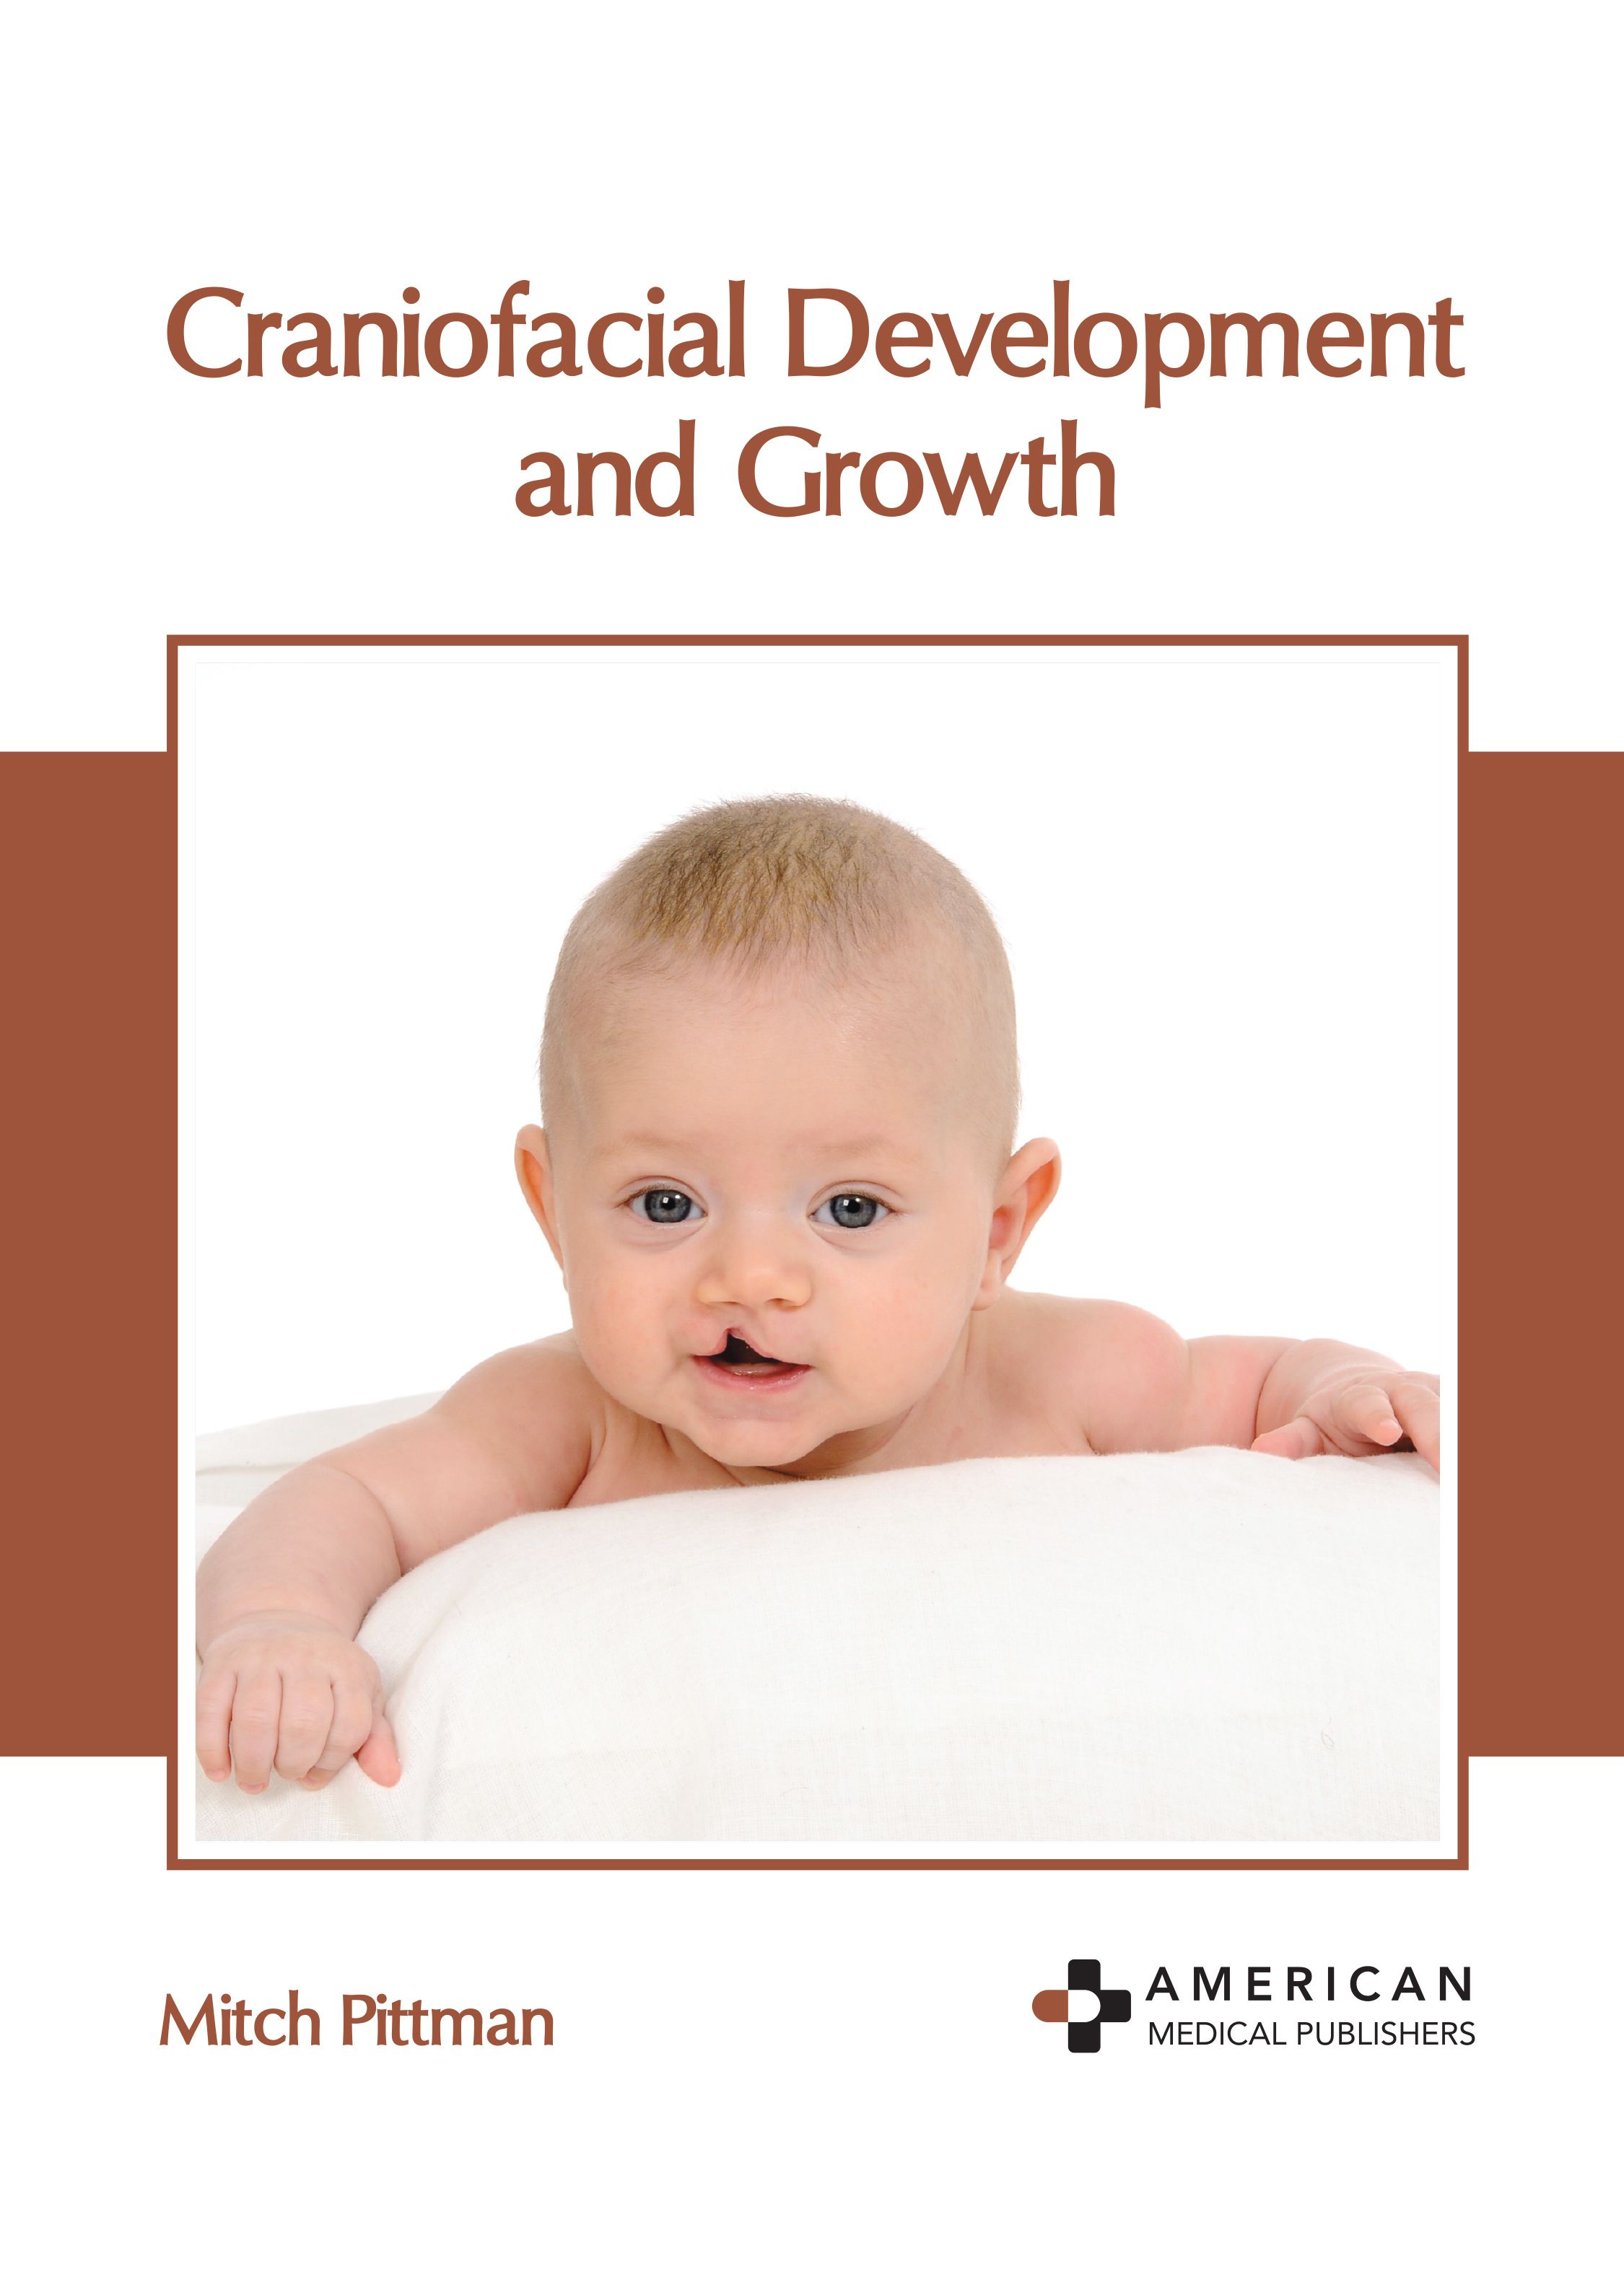 

exclusive-publishers/american-medical-publishers/craniofacial-development-and-growth-9798887400280